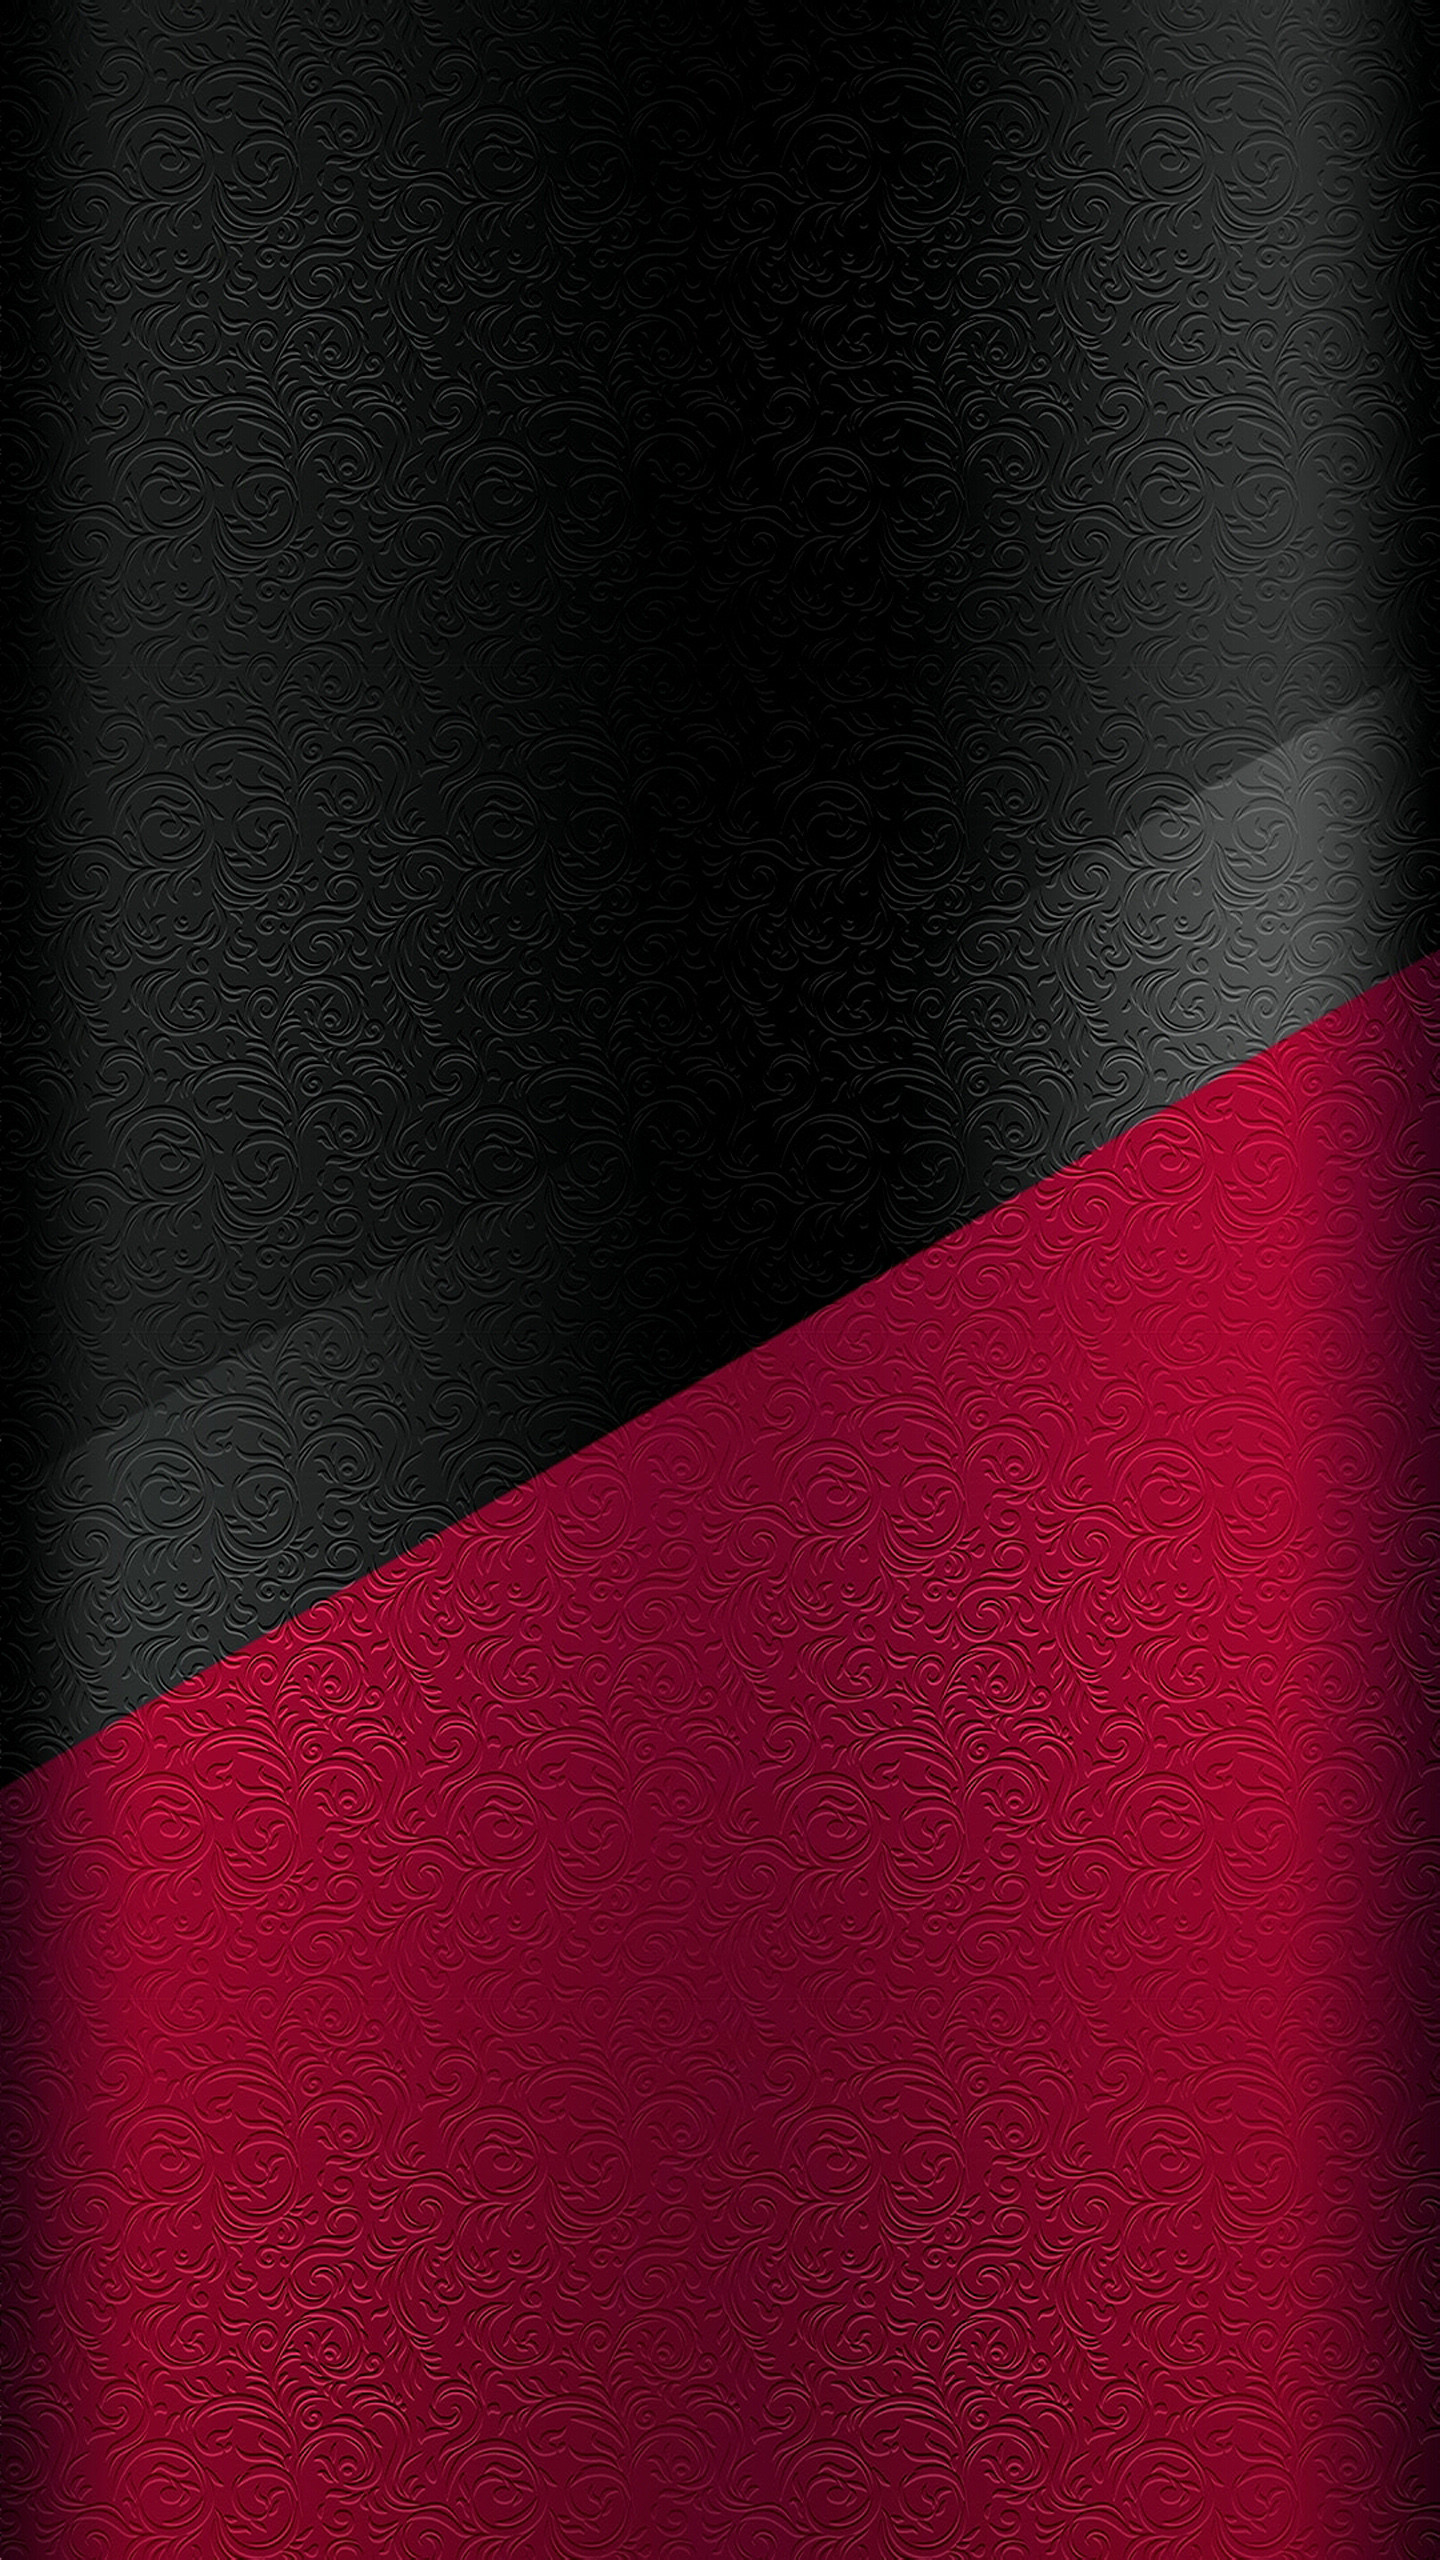 1440x2560 Dark S7 Edge wallpaper 04 with black and red floral pattern